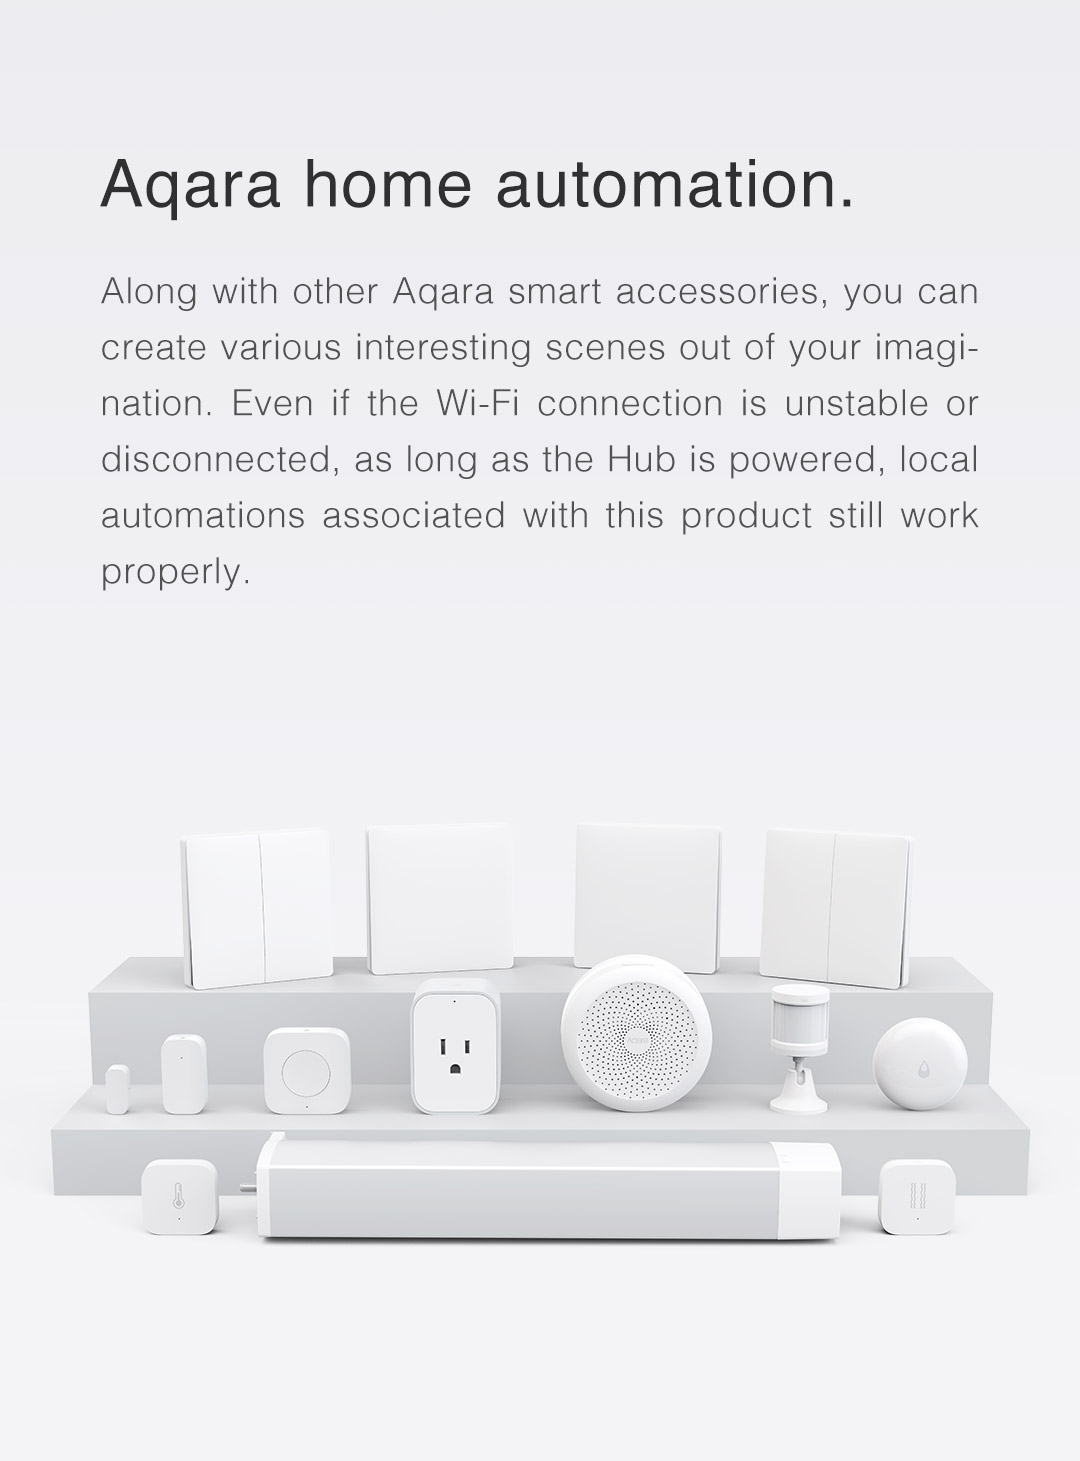 Porfolio of smart home system and devices